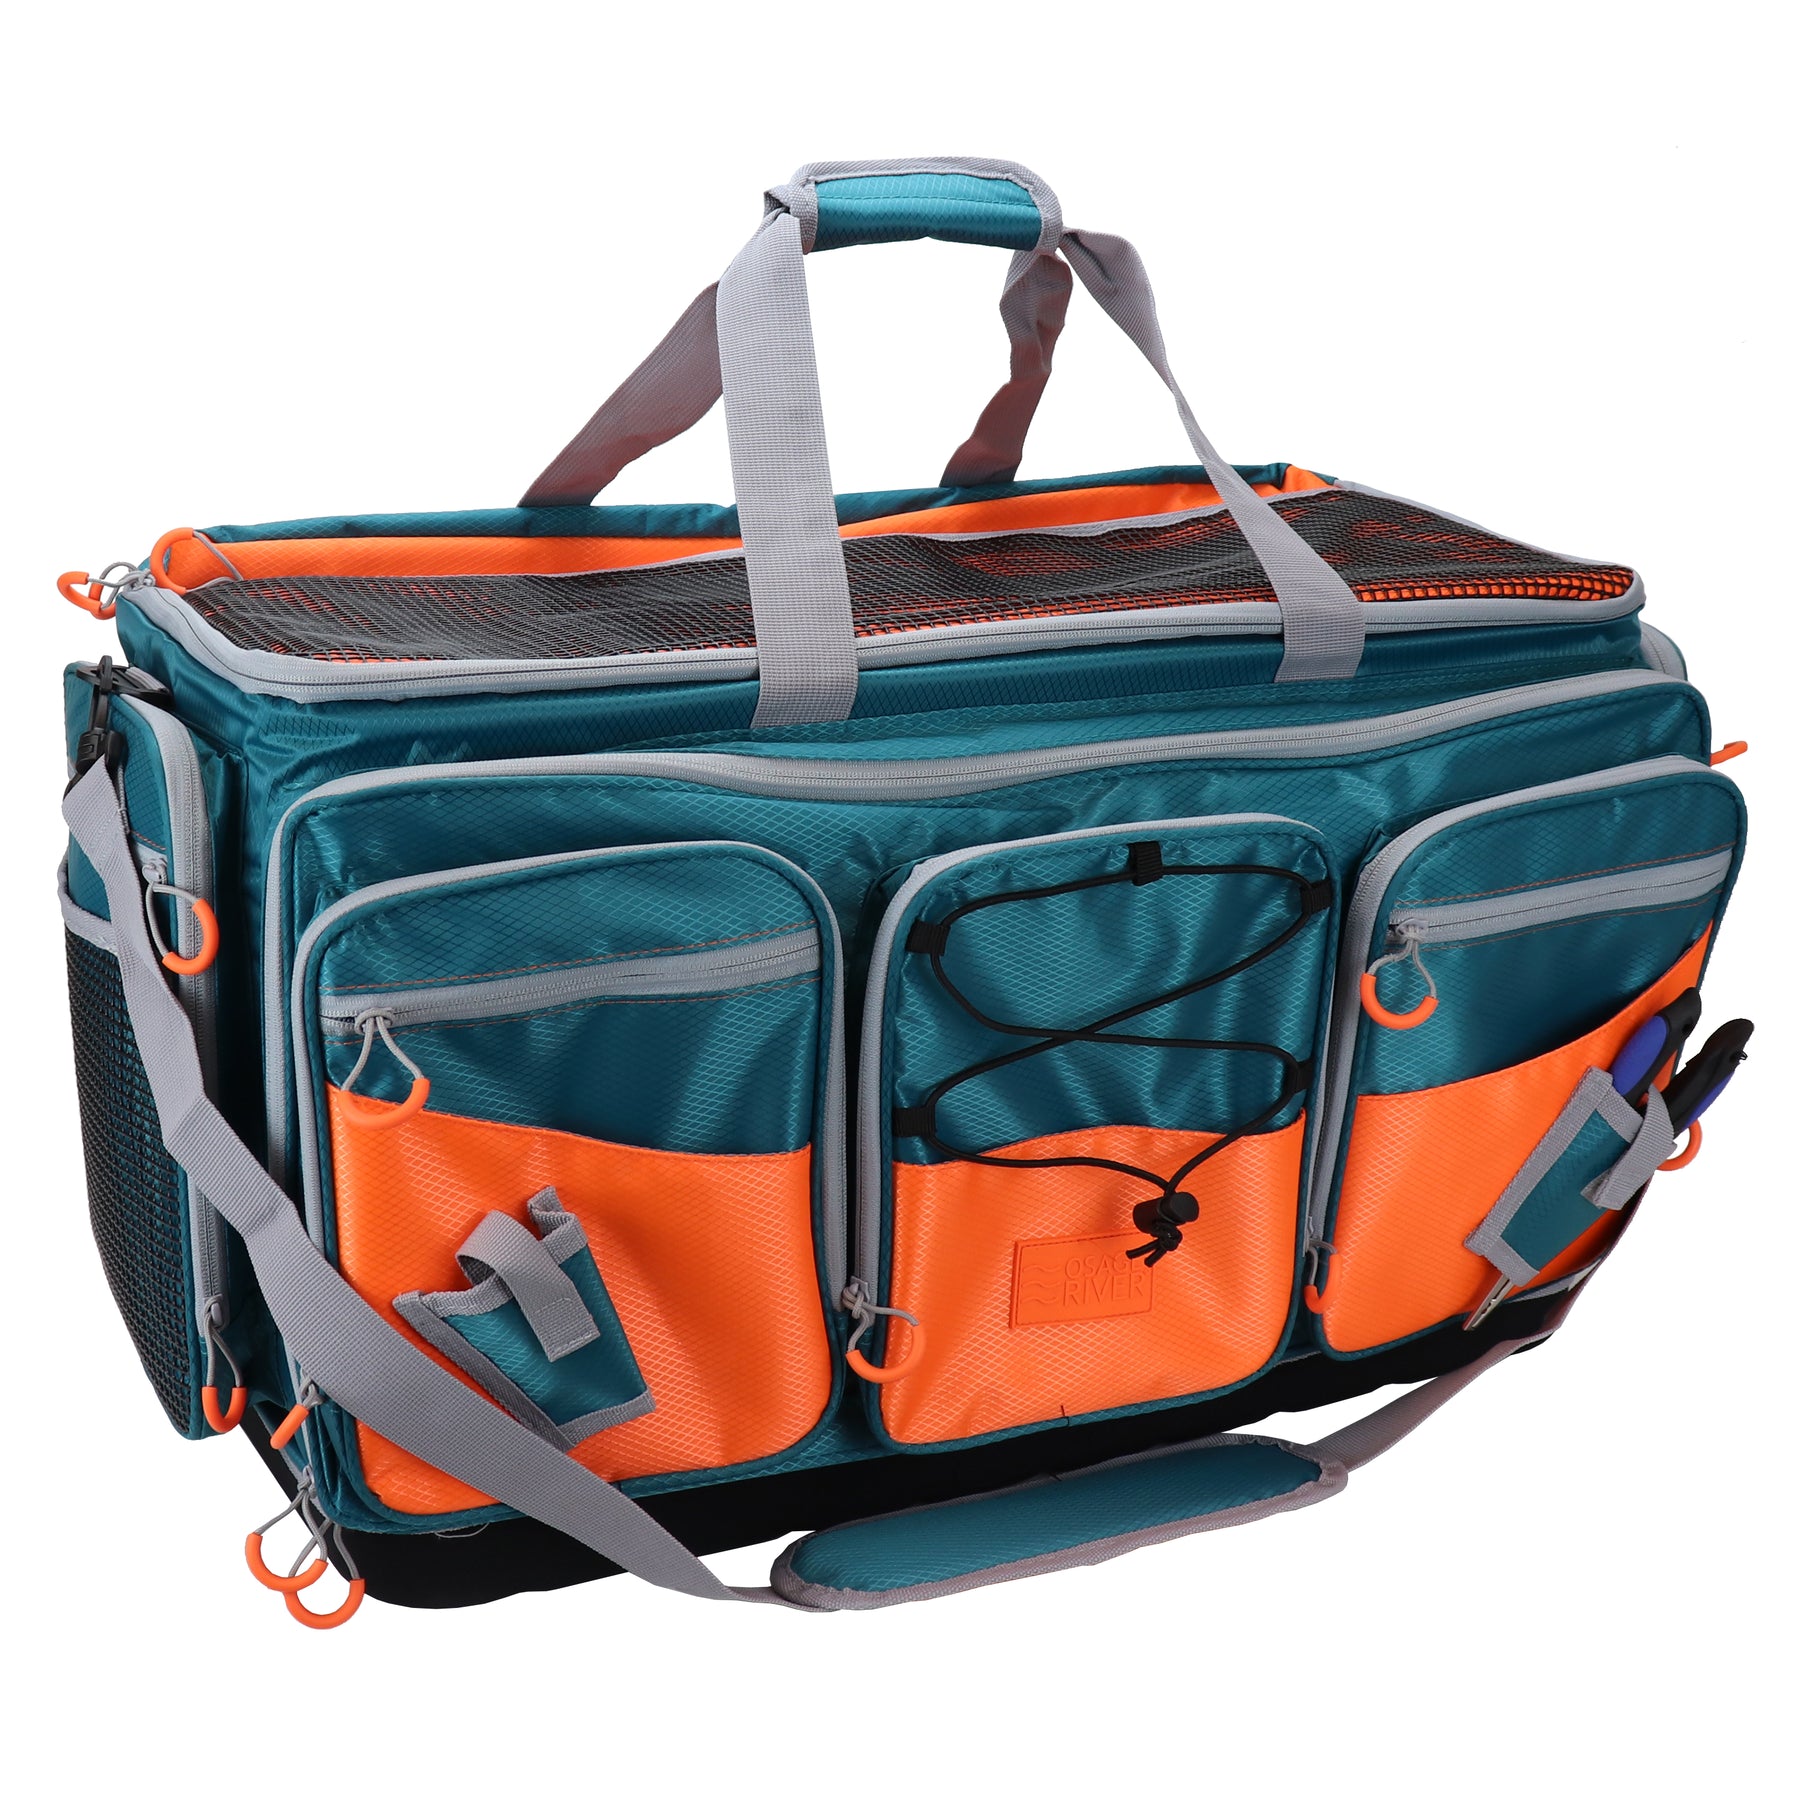 Saltwater Resistant Fishing Tackle Bag, Heavy-Duty Tackle Box Organize ...